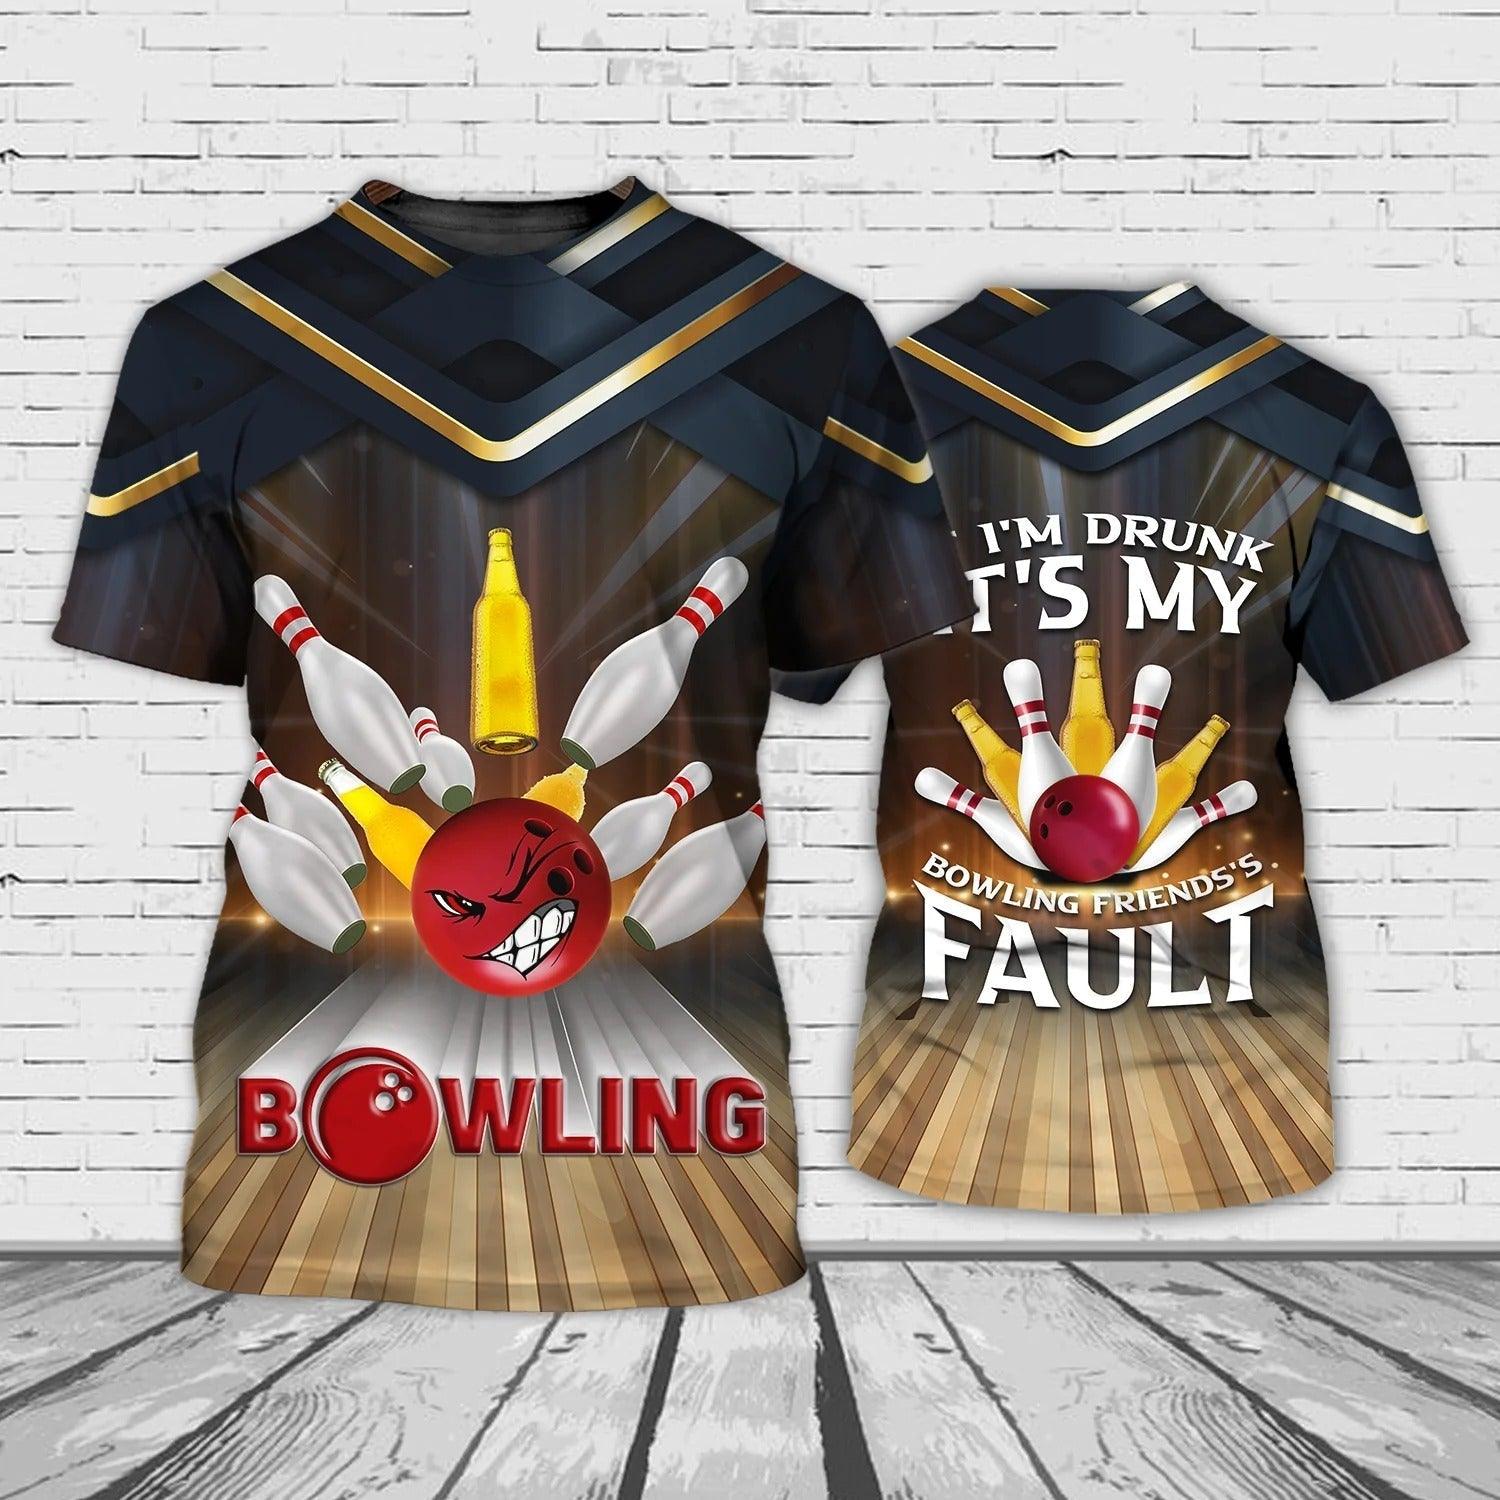 Funny Bowling T Shirt, If I'm Drunk It's My Bowling Friend's Fault, Bowling Team Players Shirt - Perfect Gift For Men, Bowling Lovers, Bowlers - Amzanimalsgift